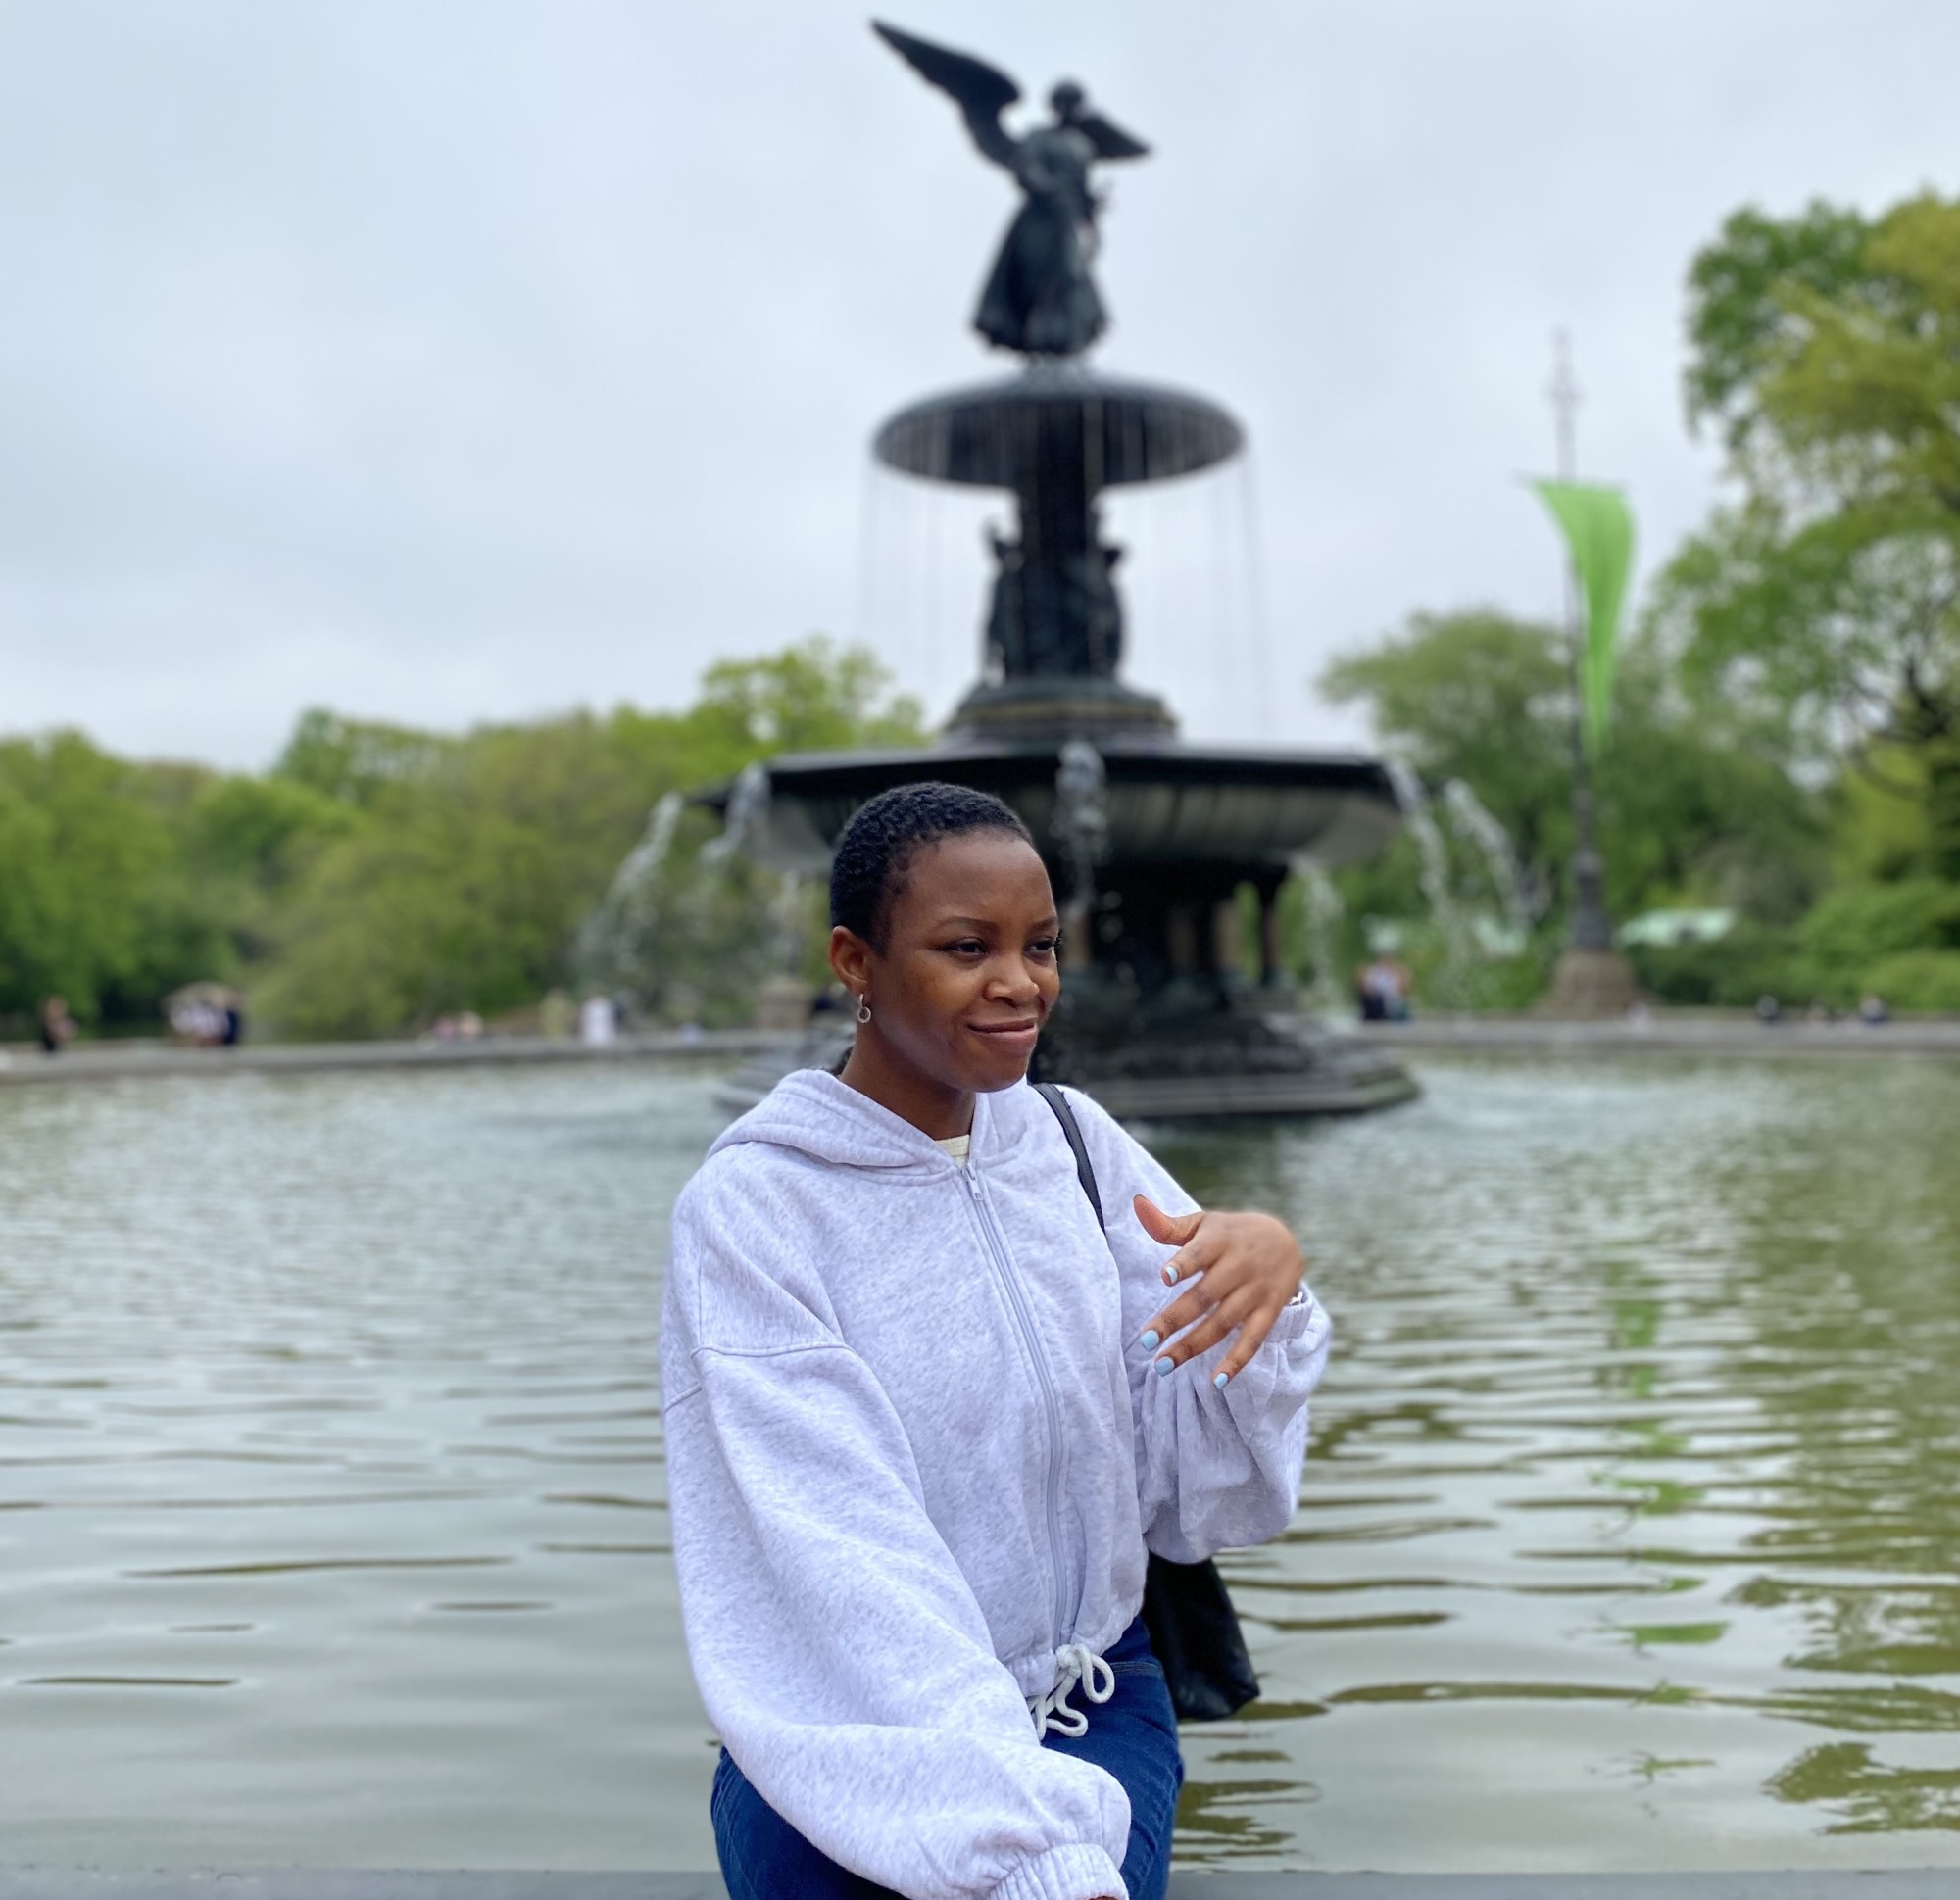 In this color portrait, Bibiana Ossai stands in front of a large fountain featuring a winged angel out of focus in the background. Ossai wears a grey zip-up hoodie and looks to the side